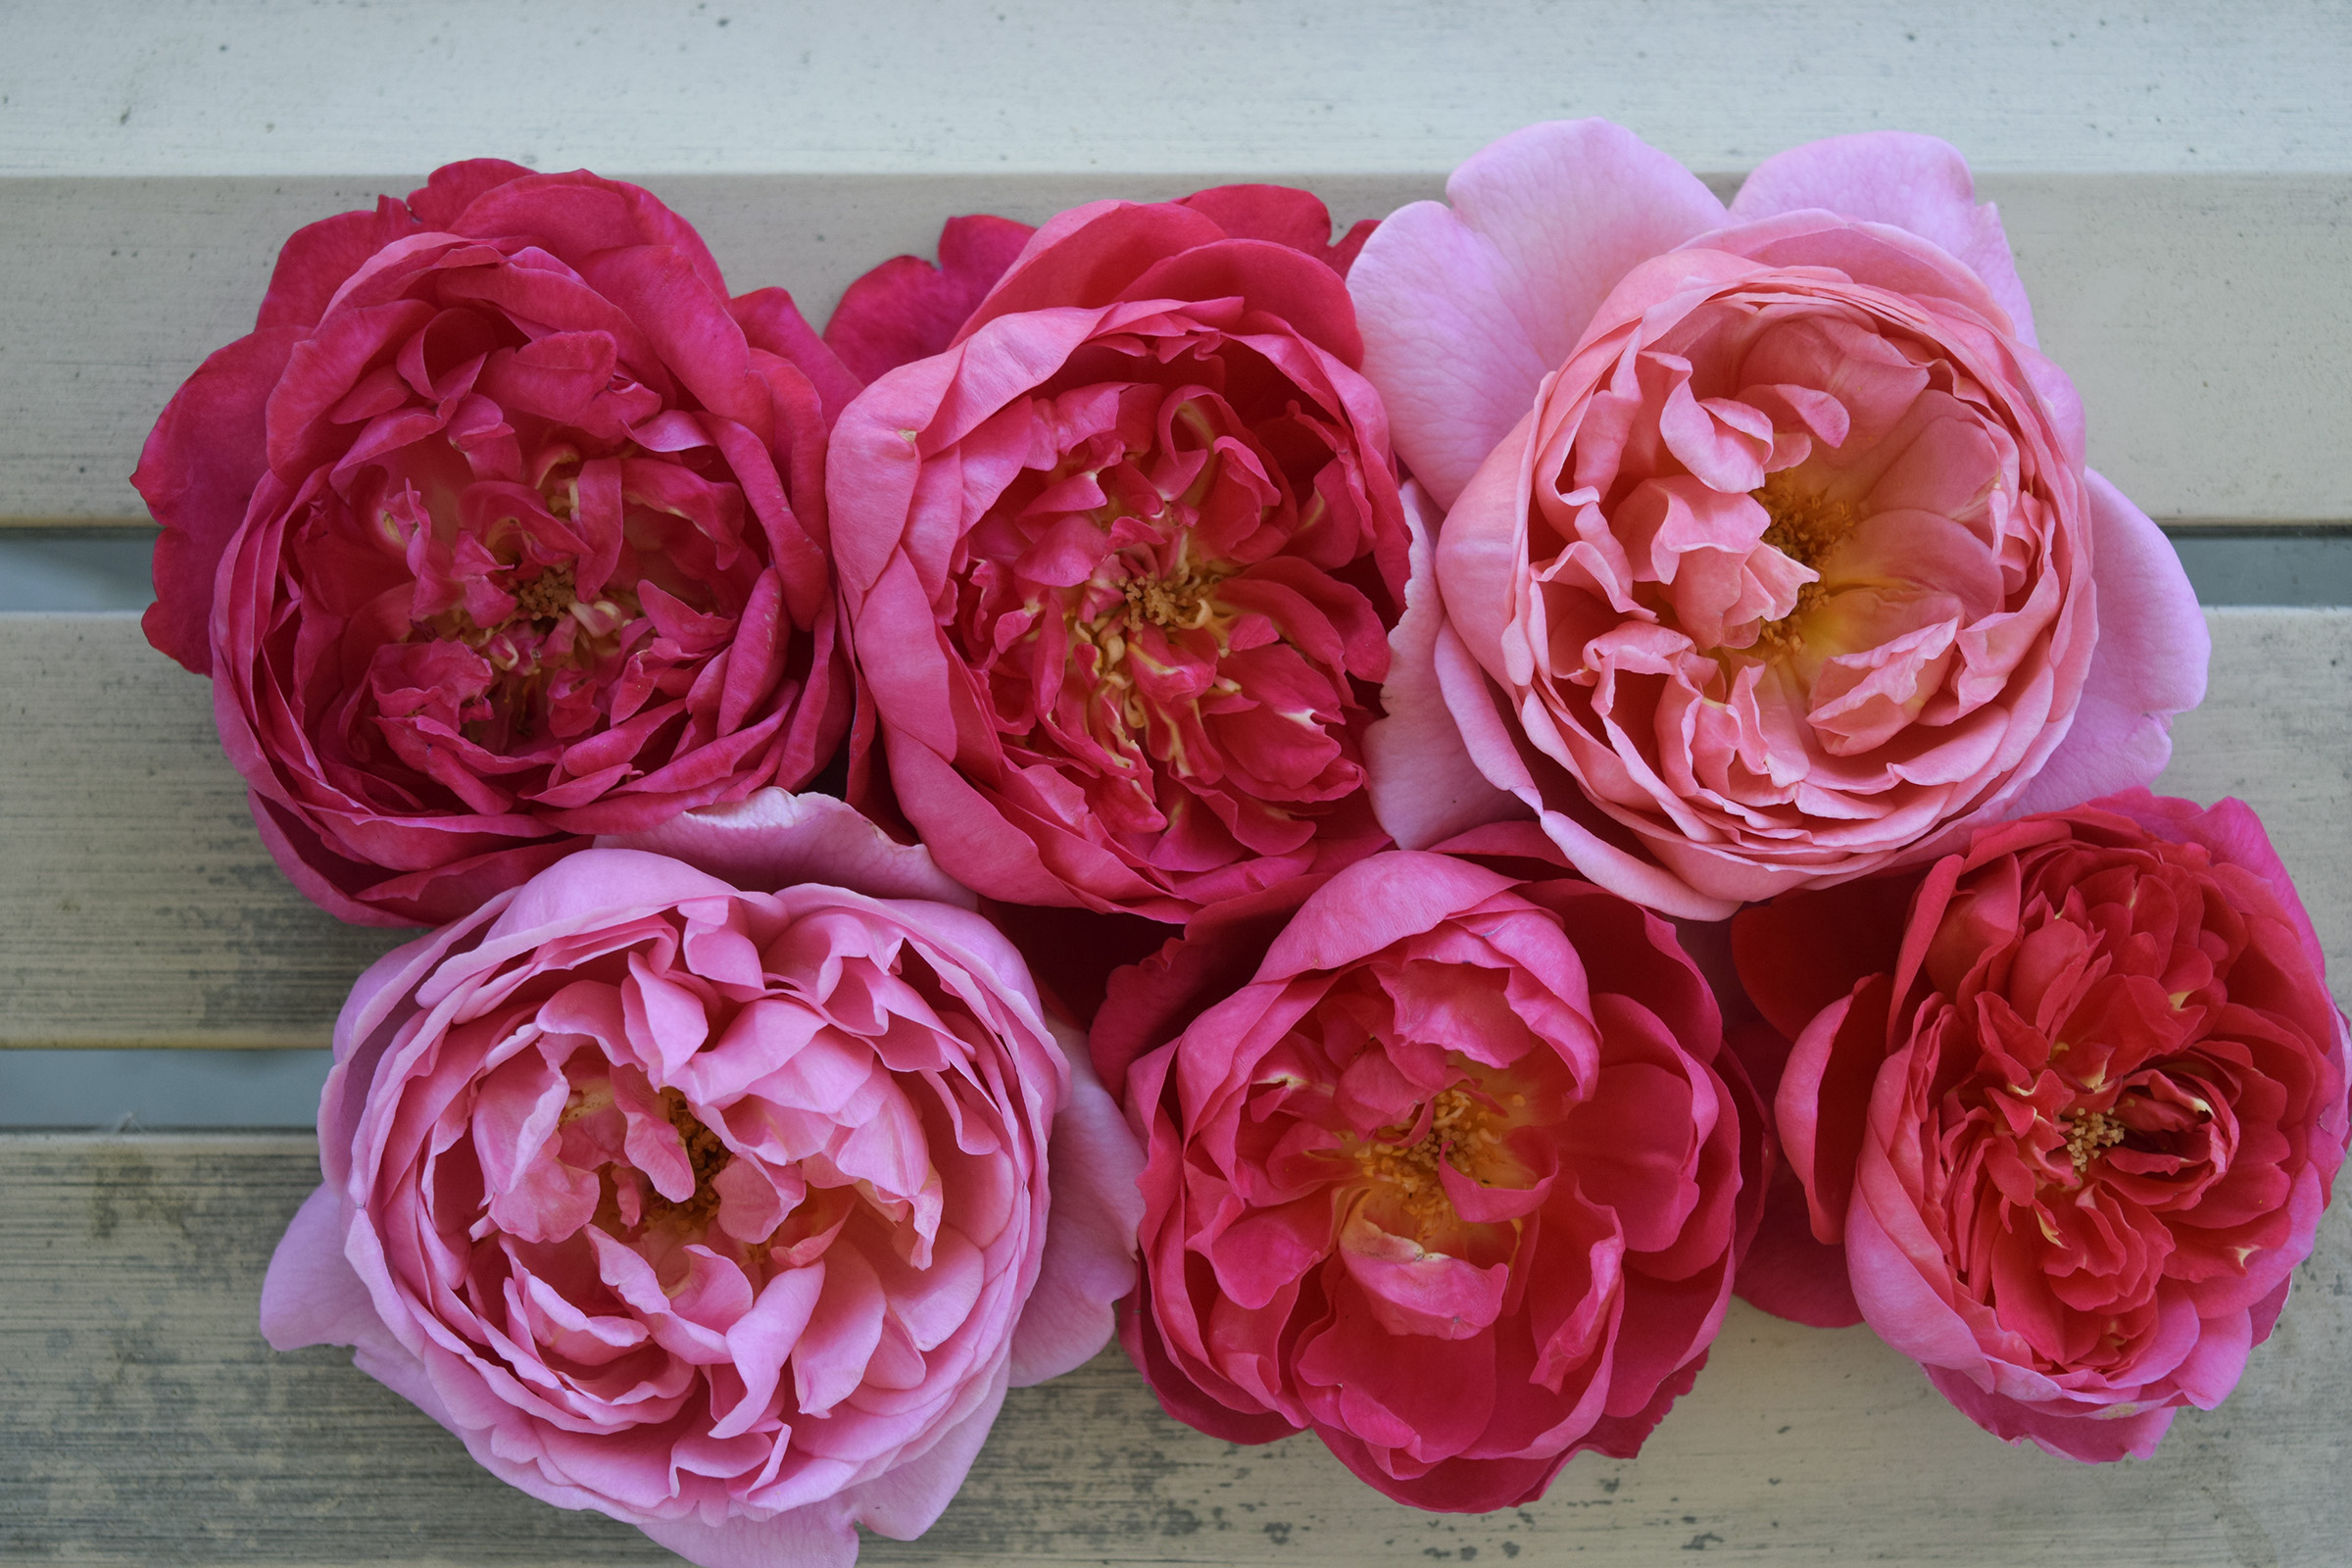 David Austin Roses - Bare root roses, Container roses, English Roses